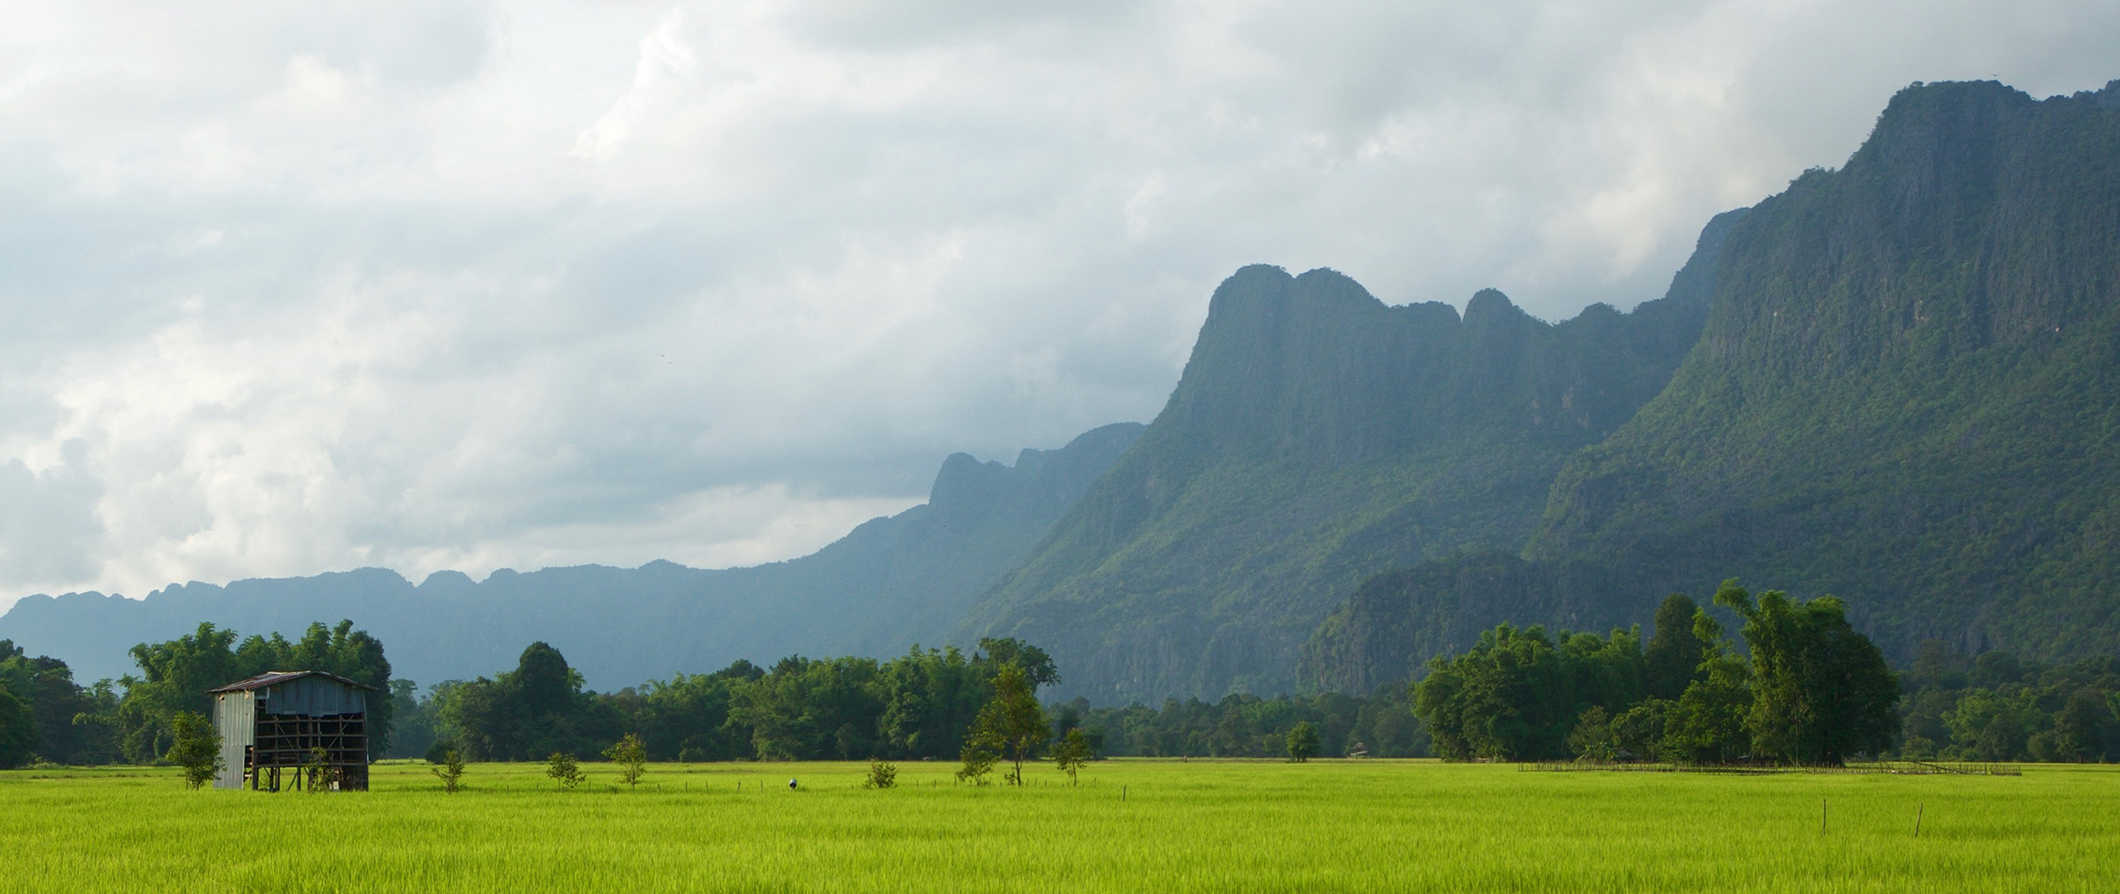 The lush hills and mountains of beautiful Laos, with a green field in the foreground